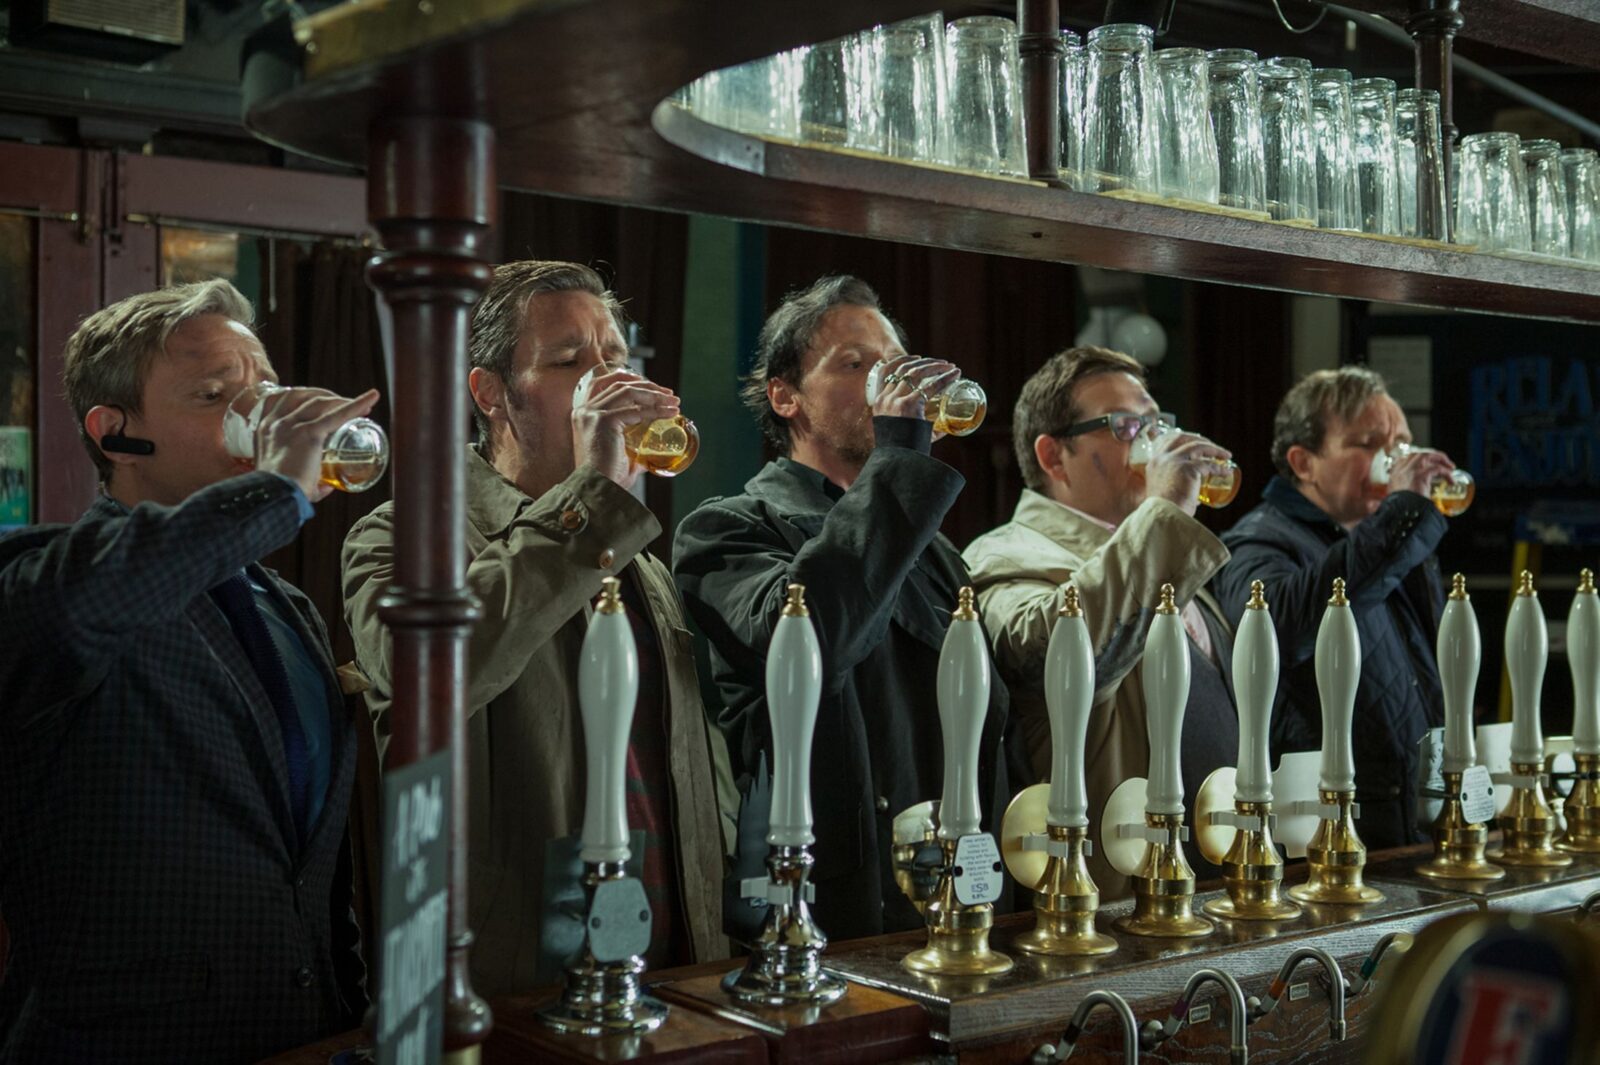 THE WORLD'S END [Review]: Genre switch? I'll drink to that!